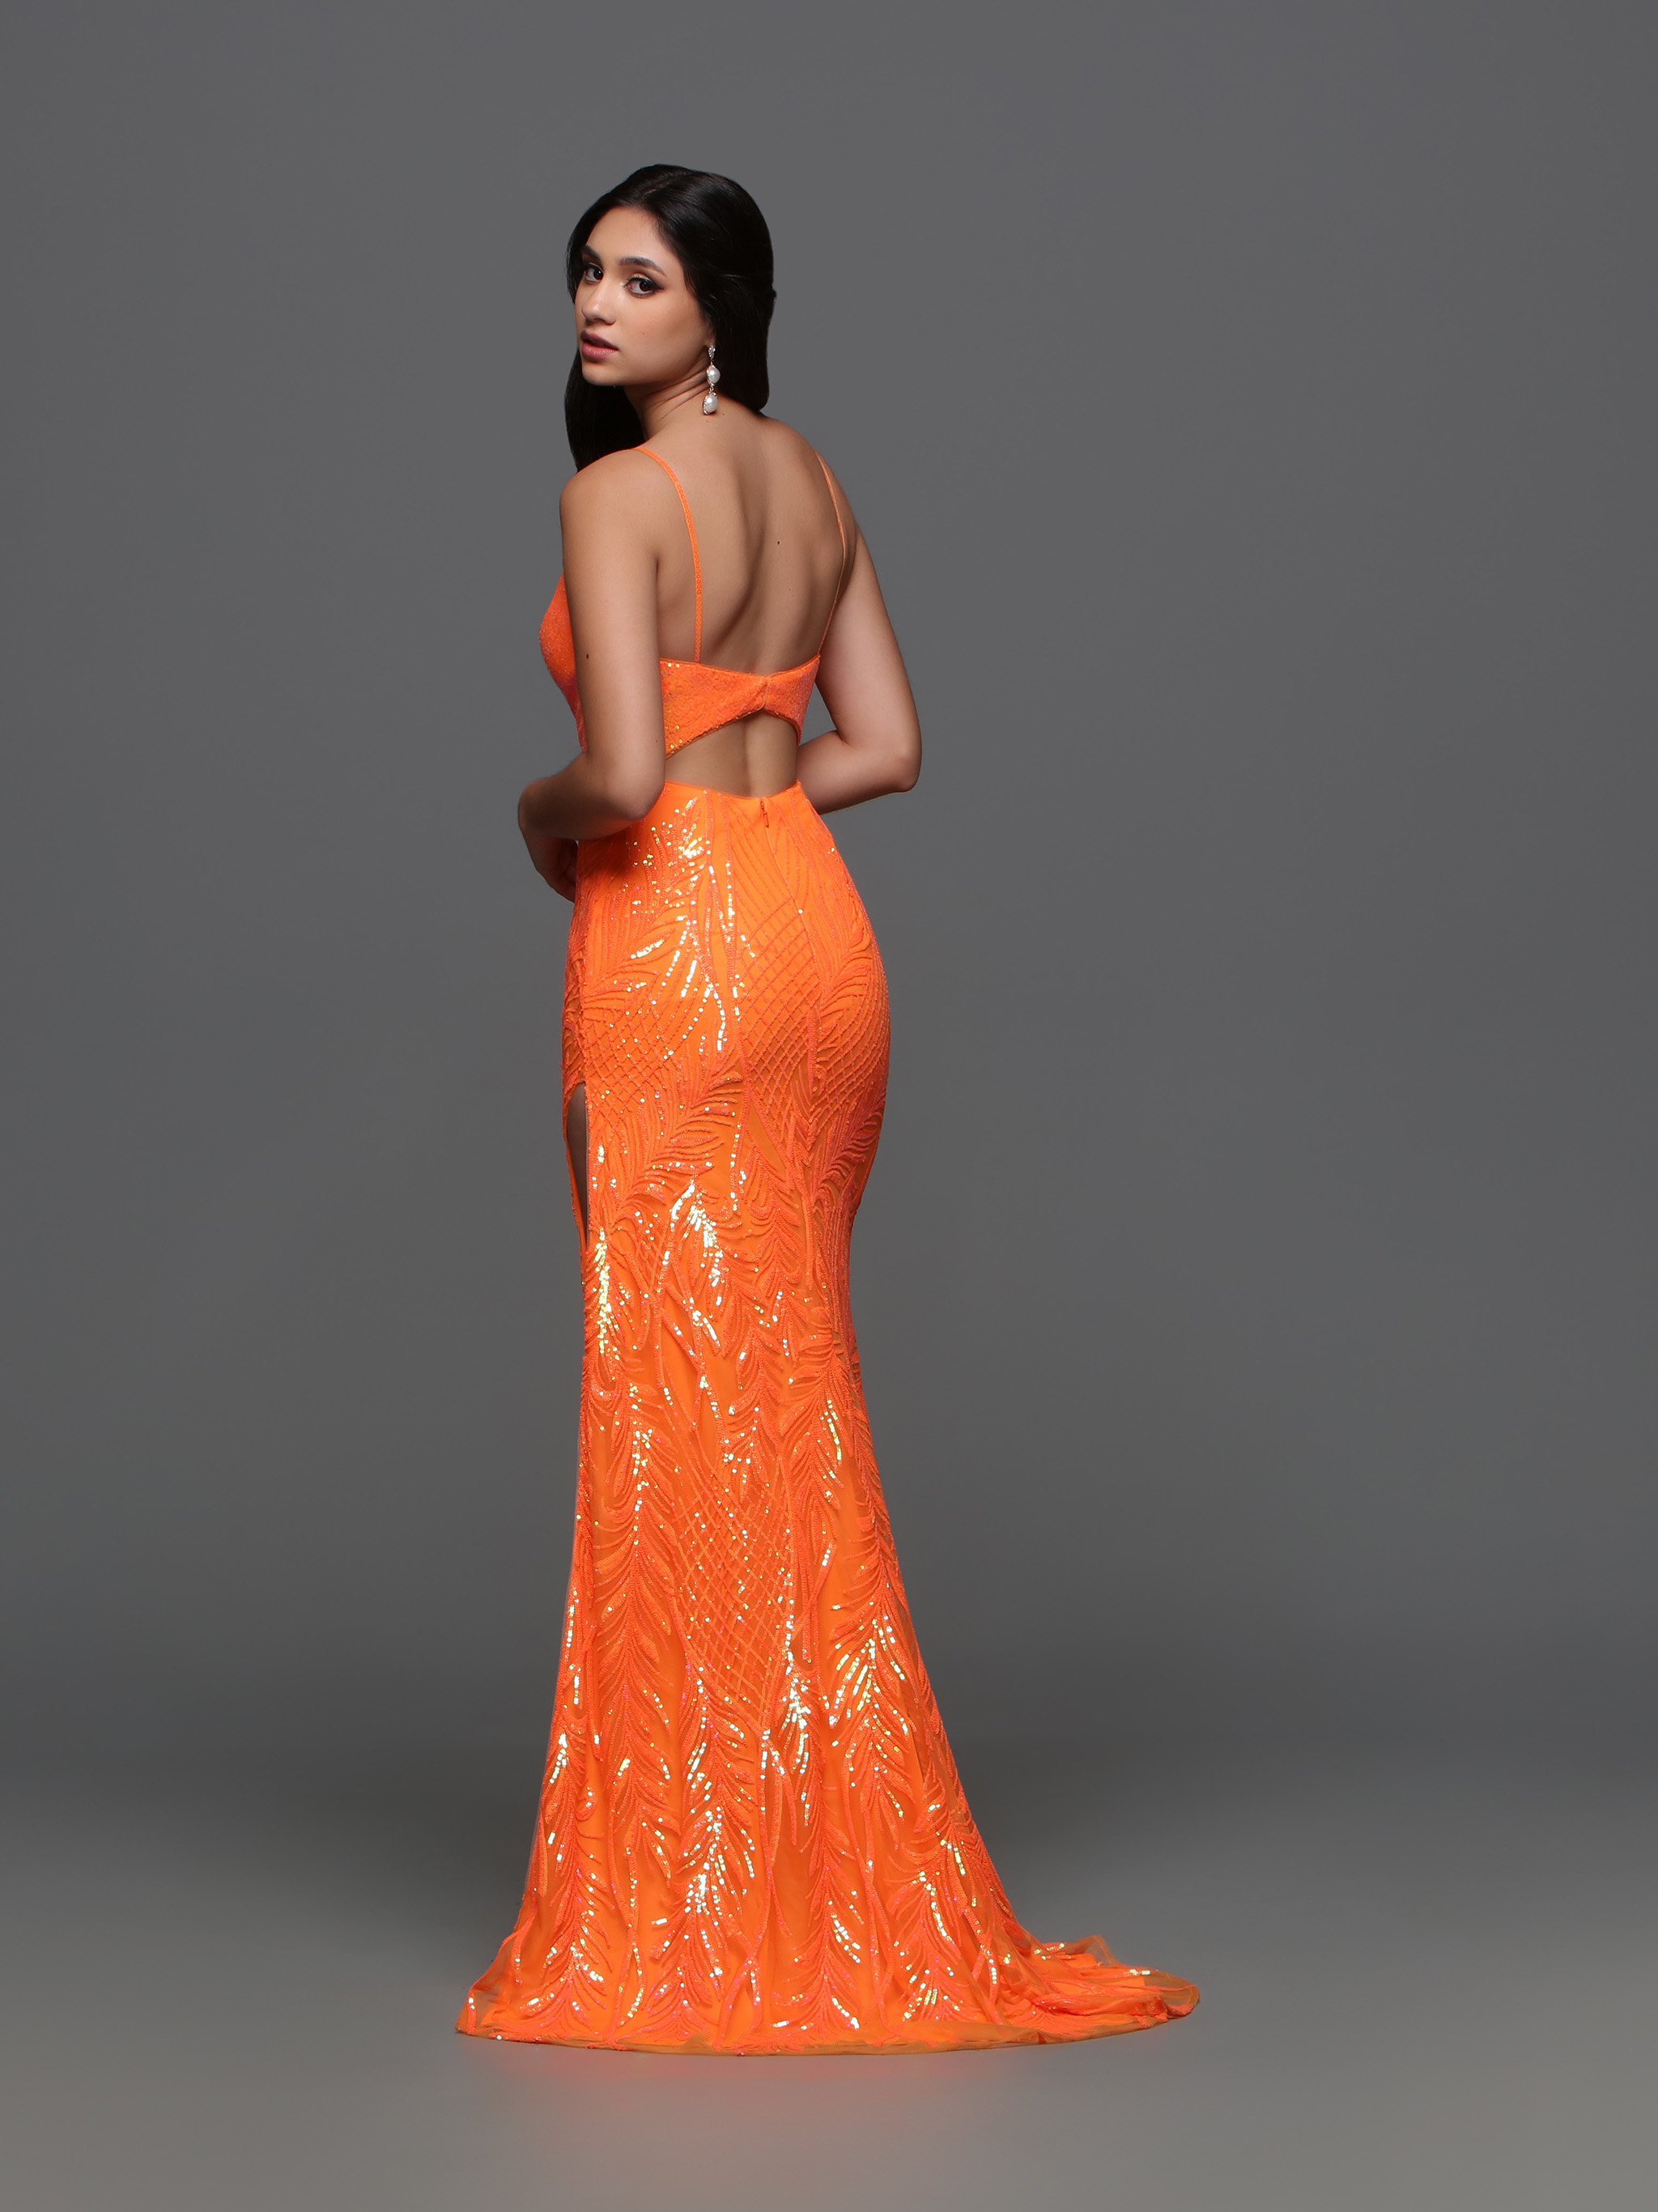 Image showing back view of style #72317